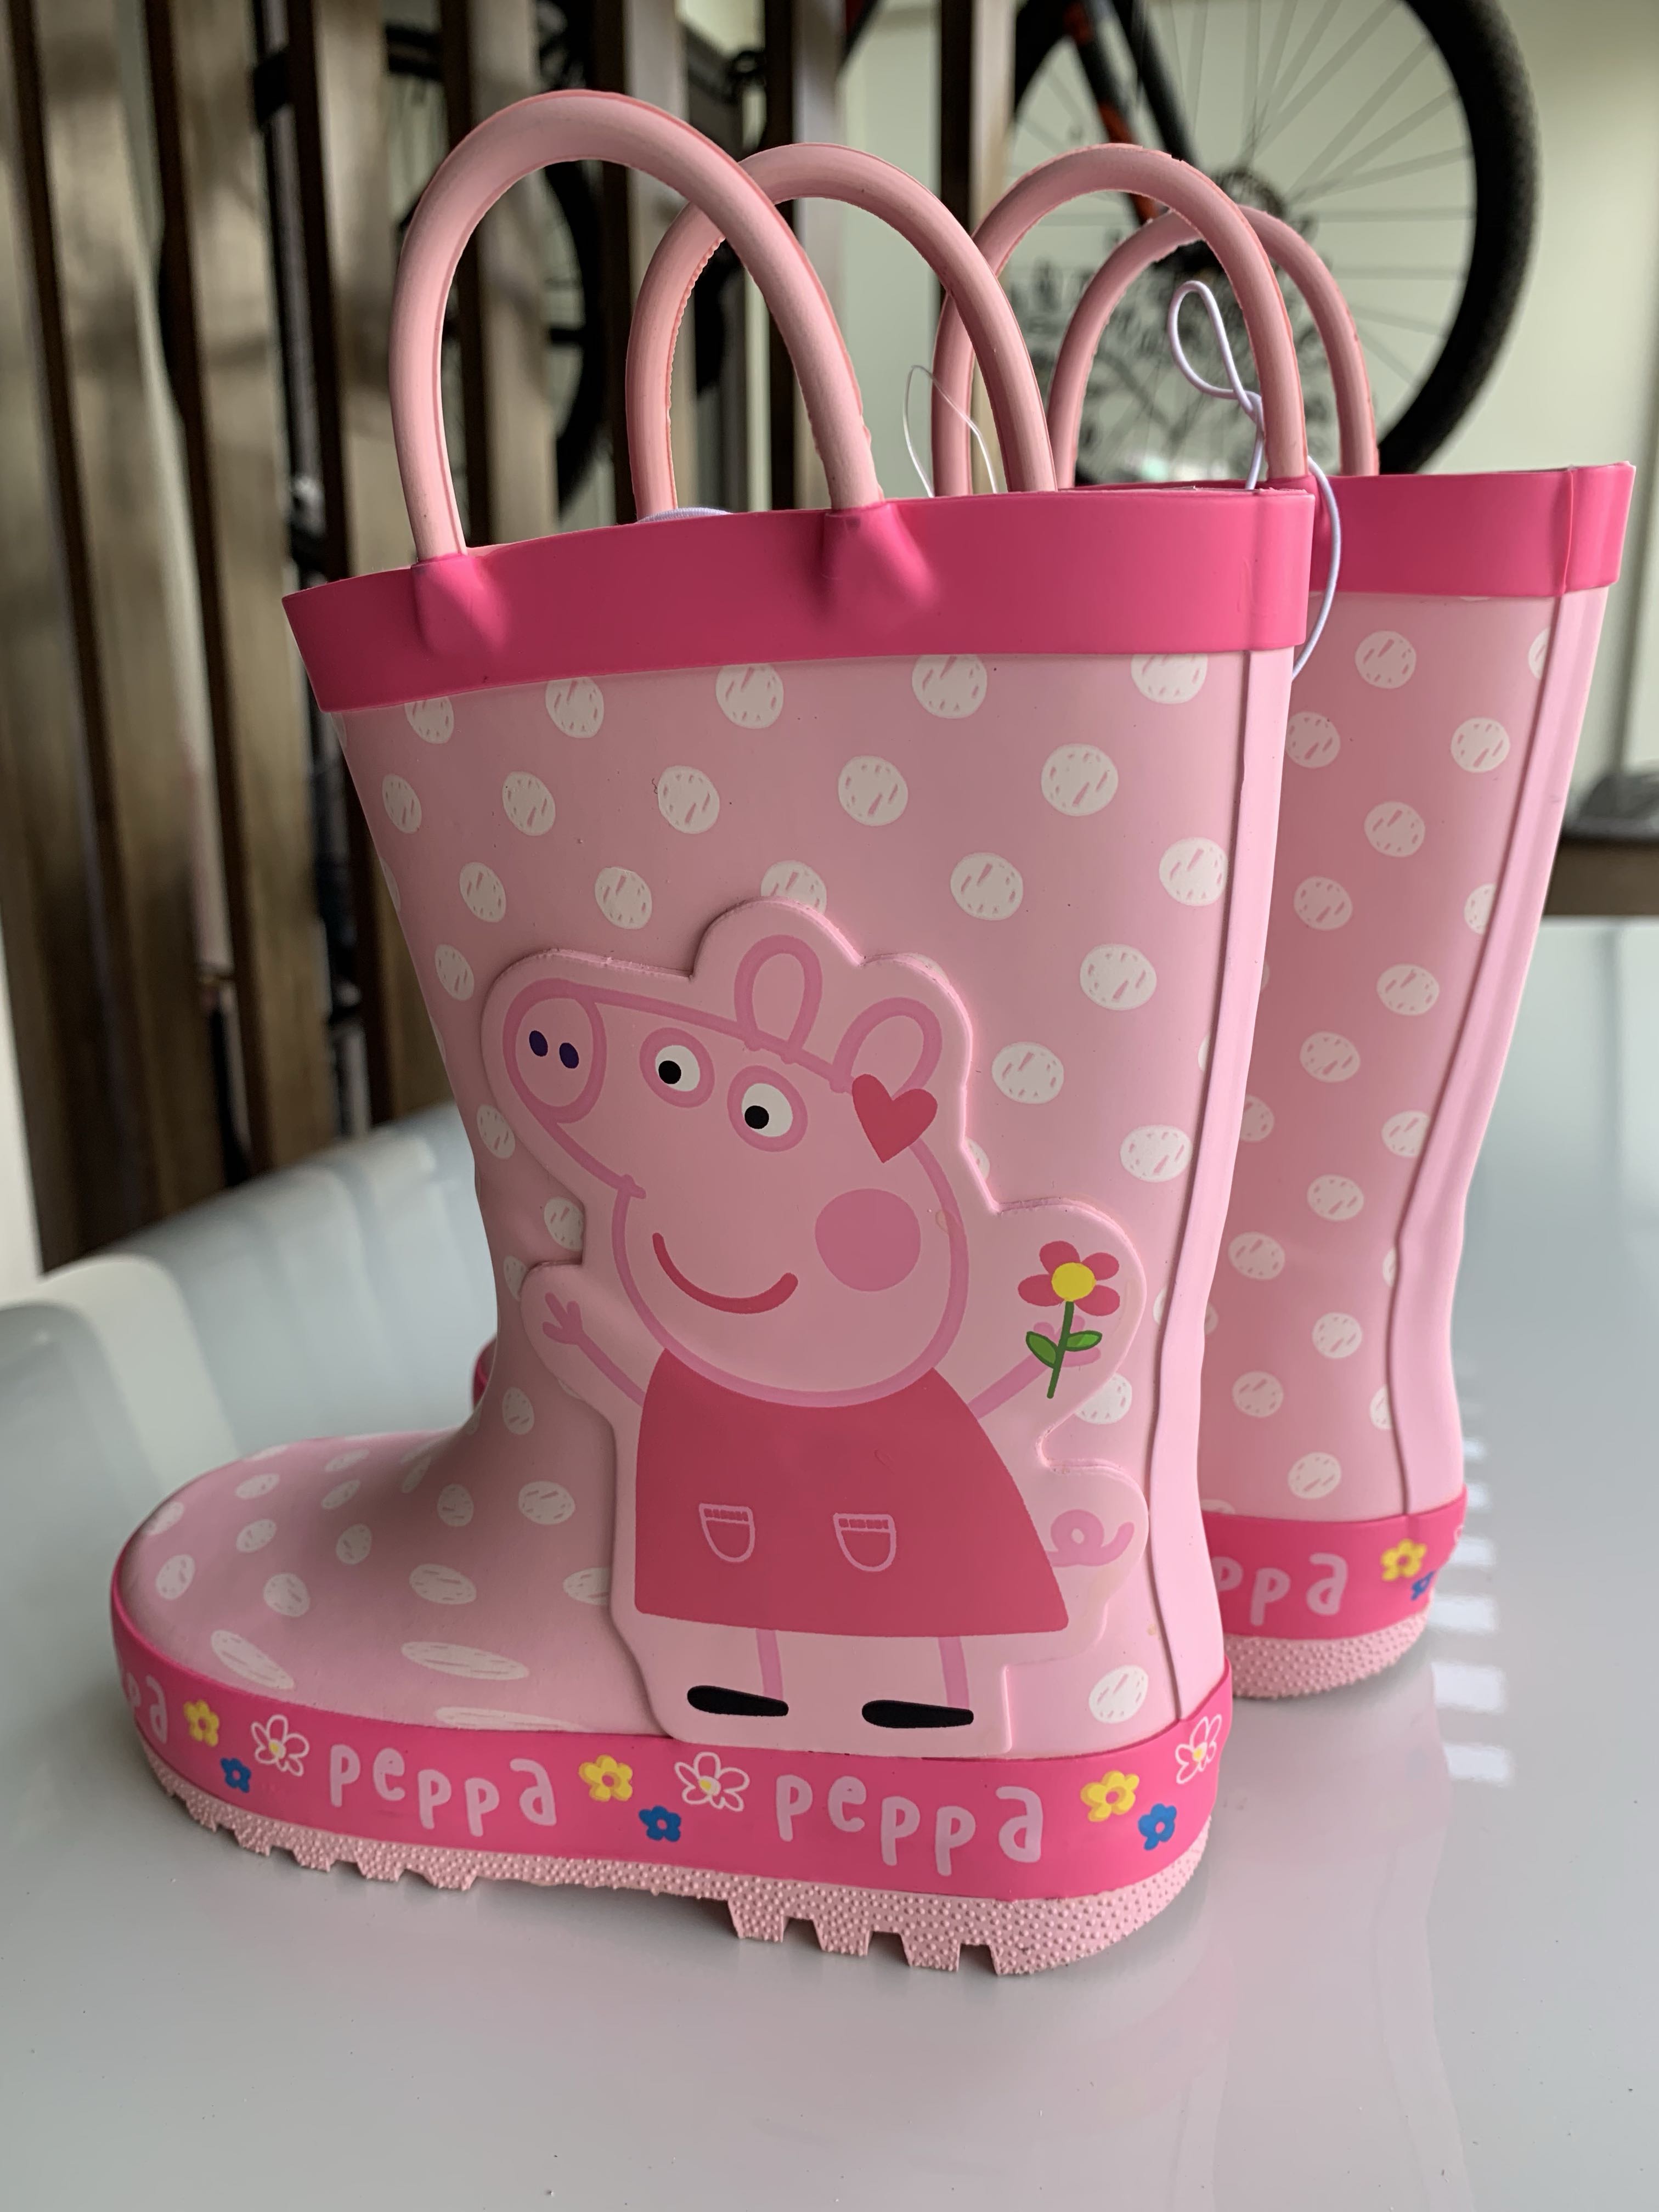 Mothercare Peppa Pig Wellies Welly Boots Size 4 New with tags 